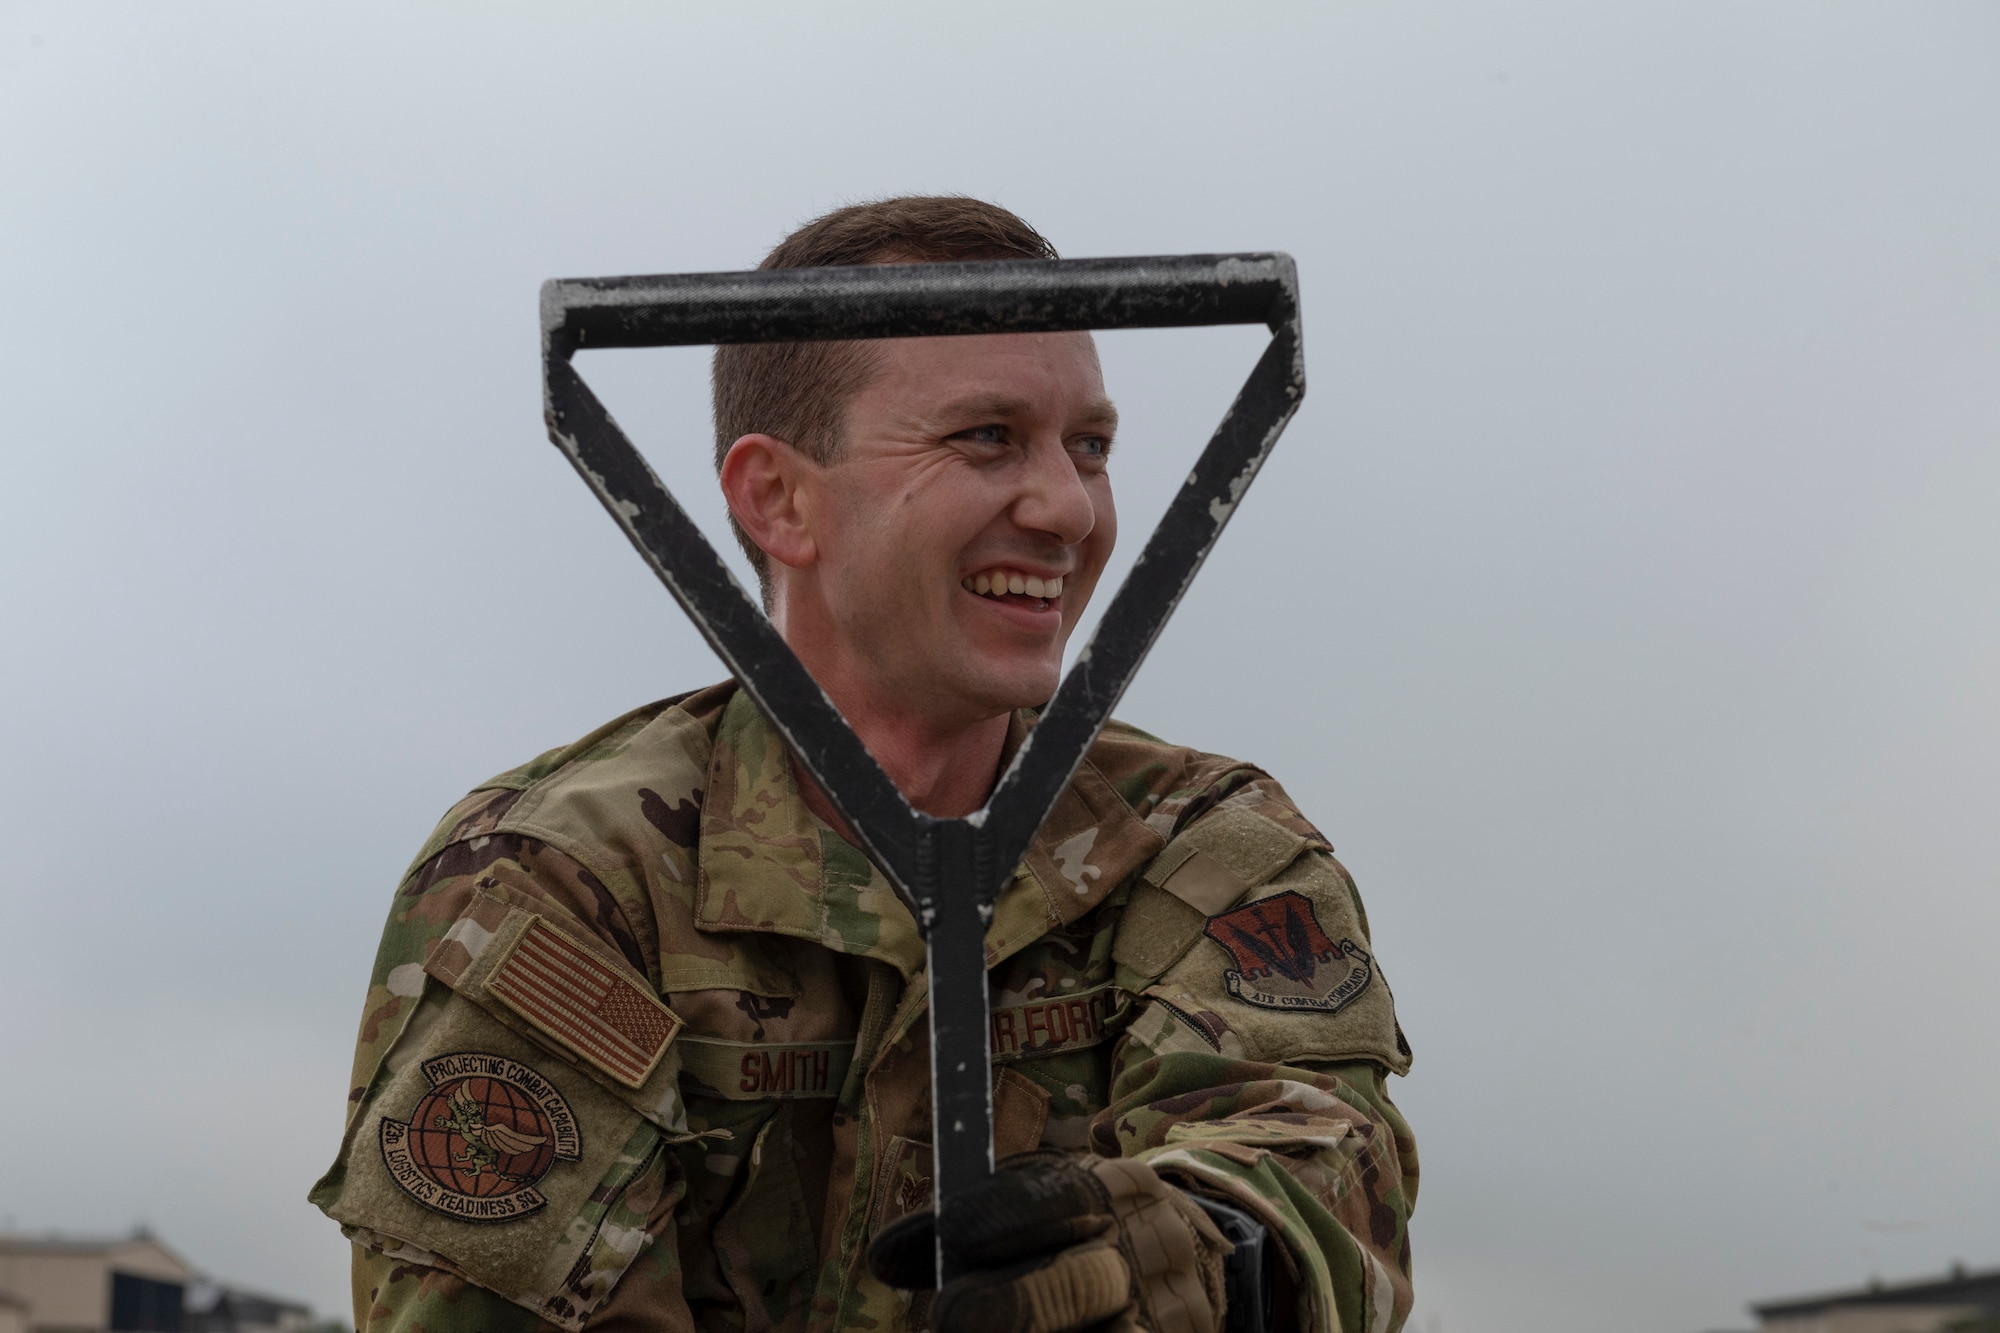 A photo of an airman smiling, holding a hose squeegee.